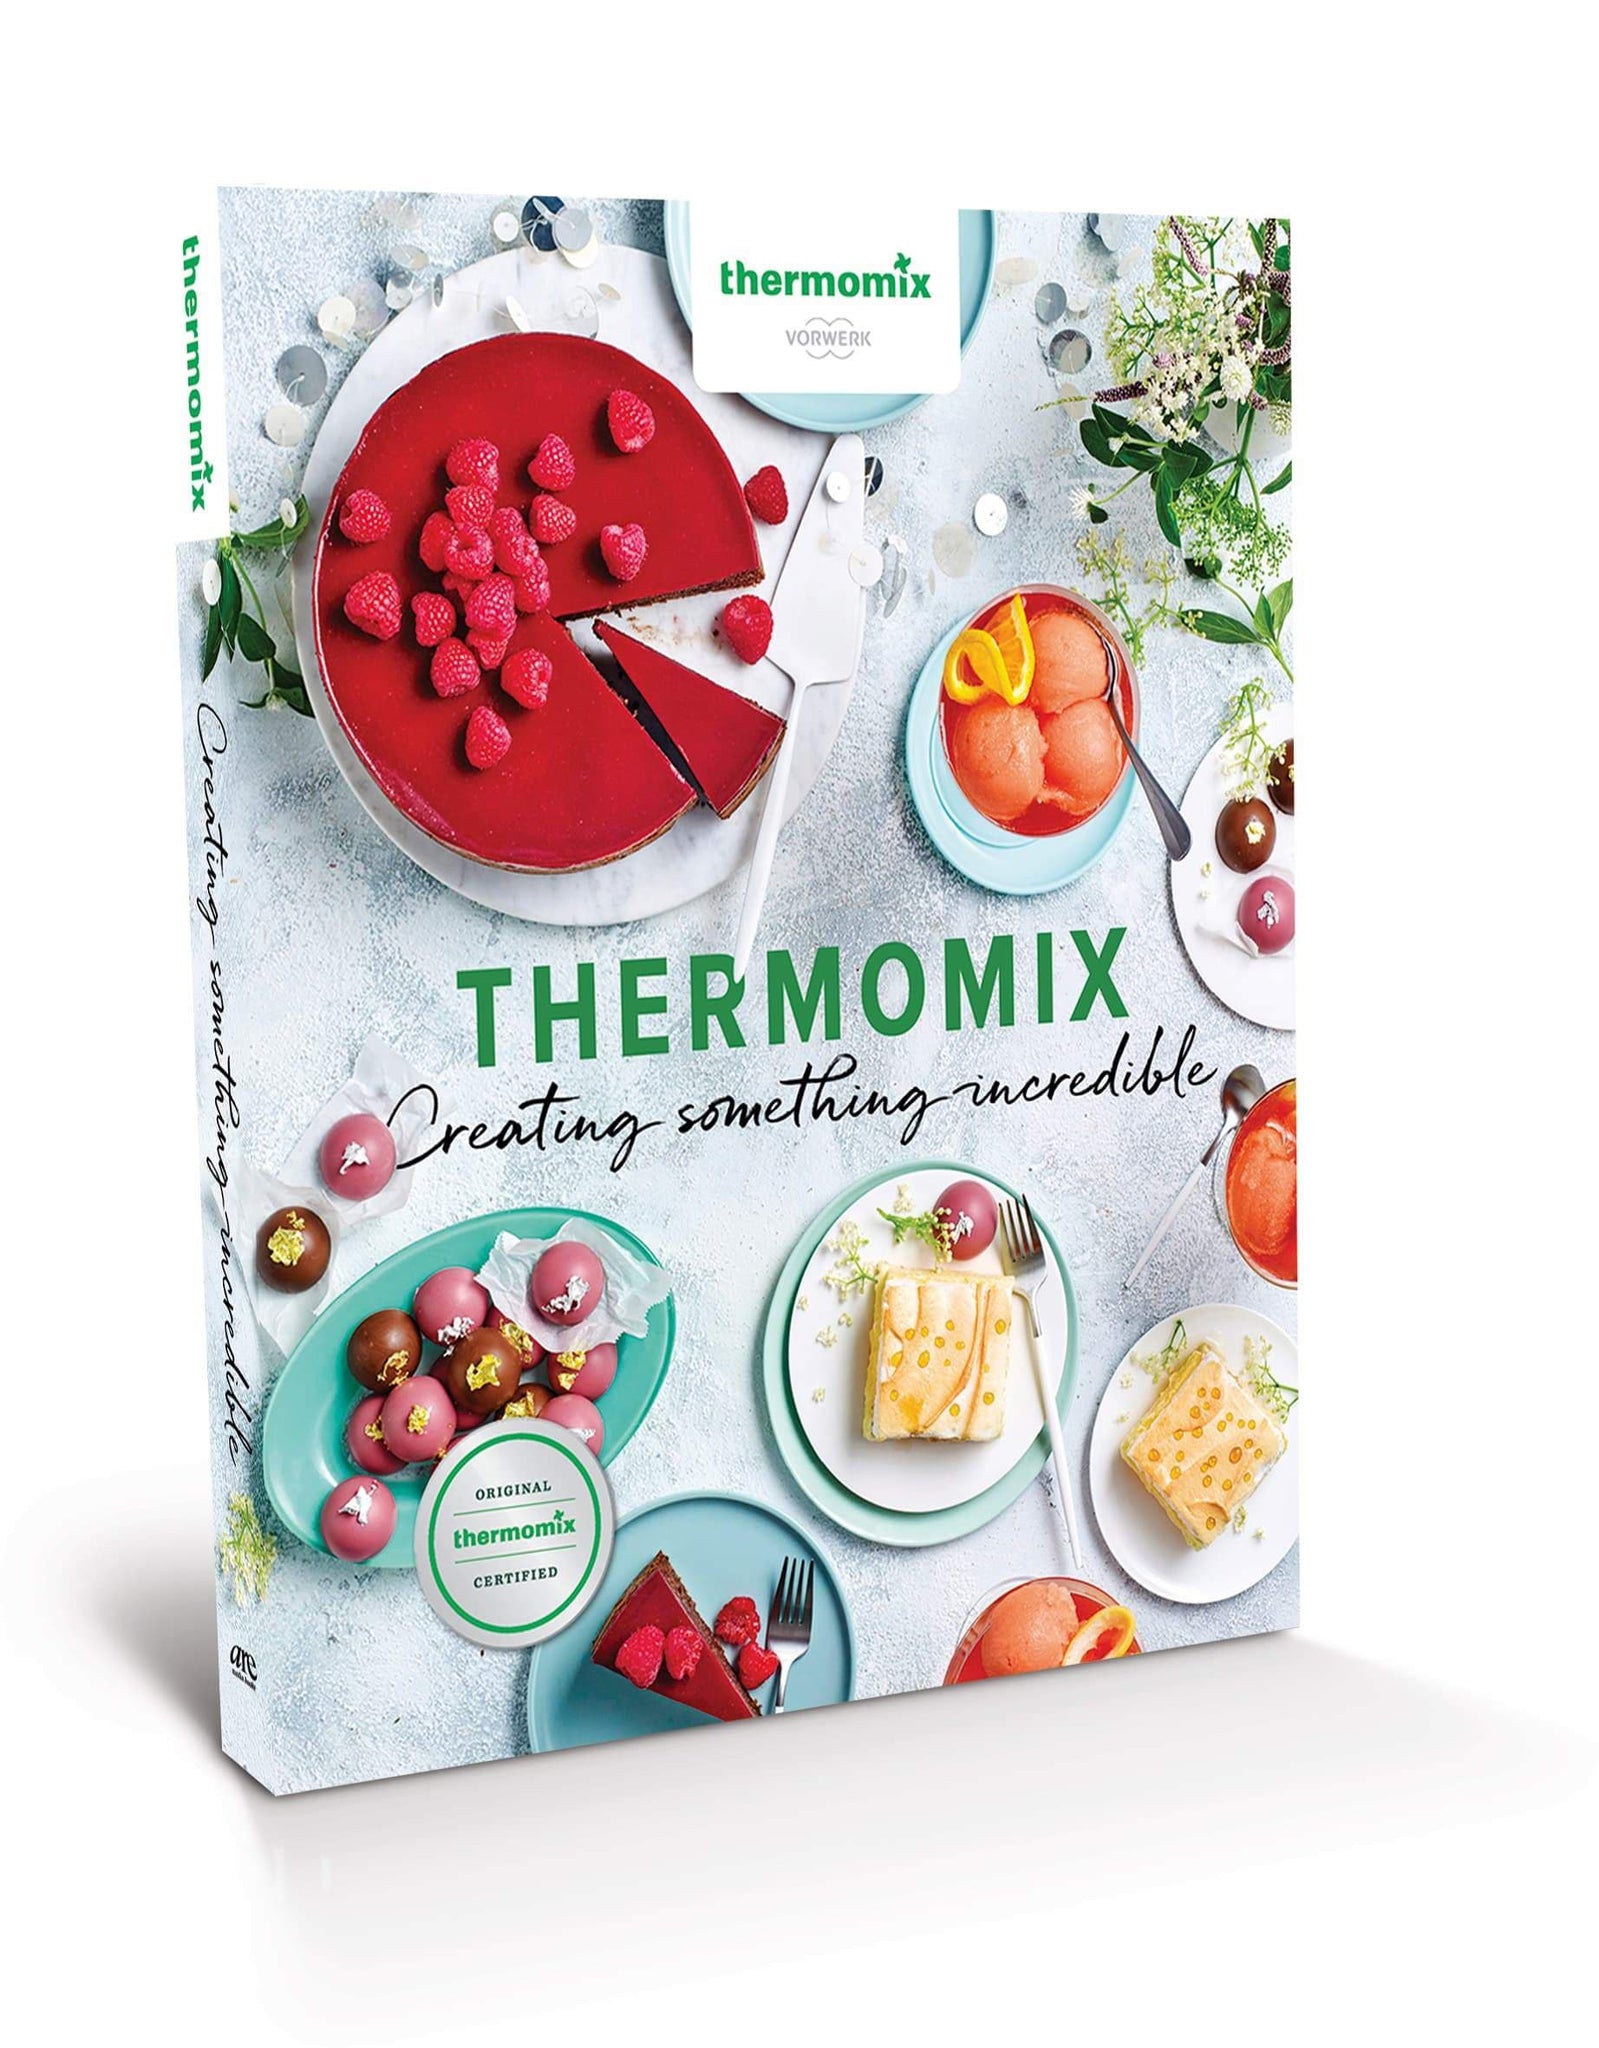 Thermomix Cookbook Thermomix: Creating Something Incredible Paperback